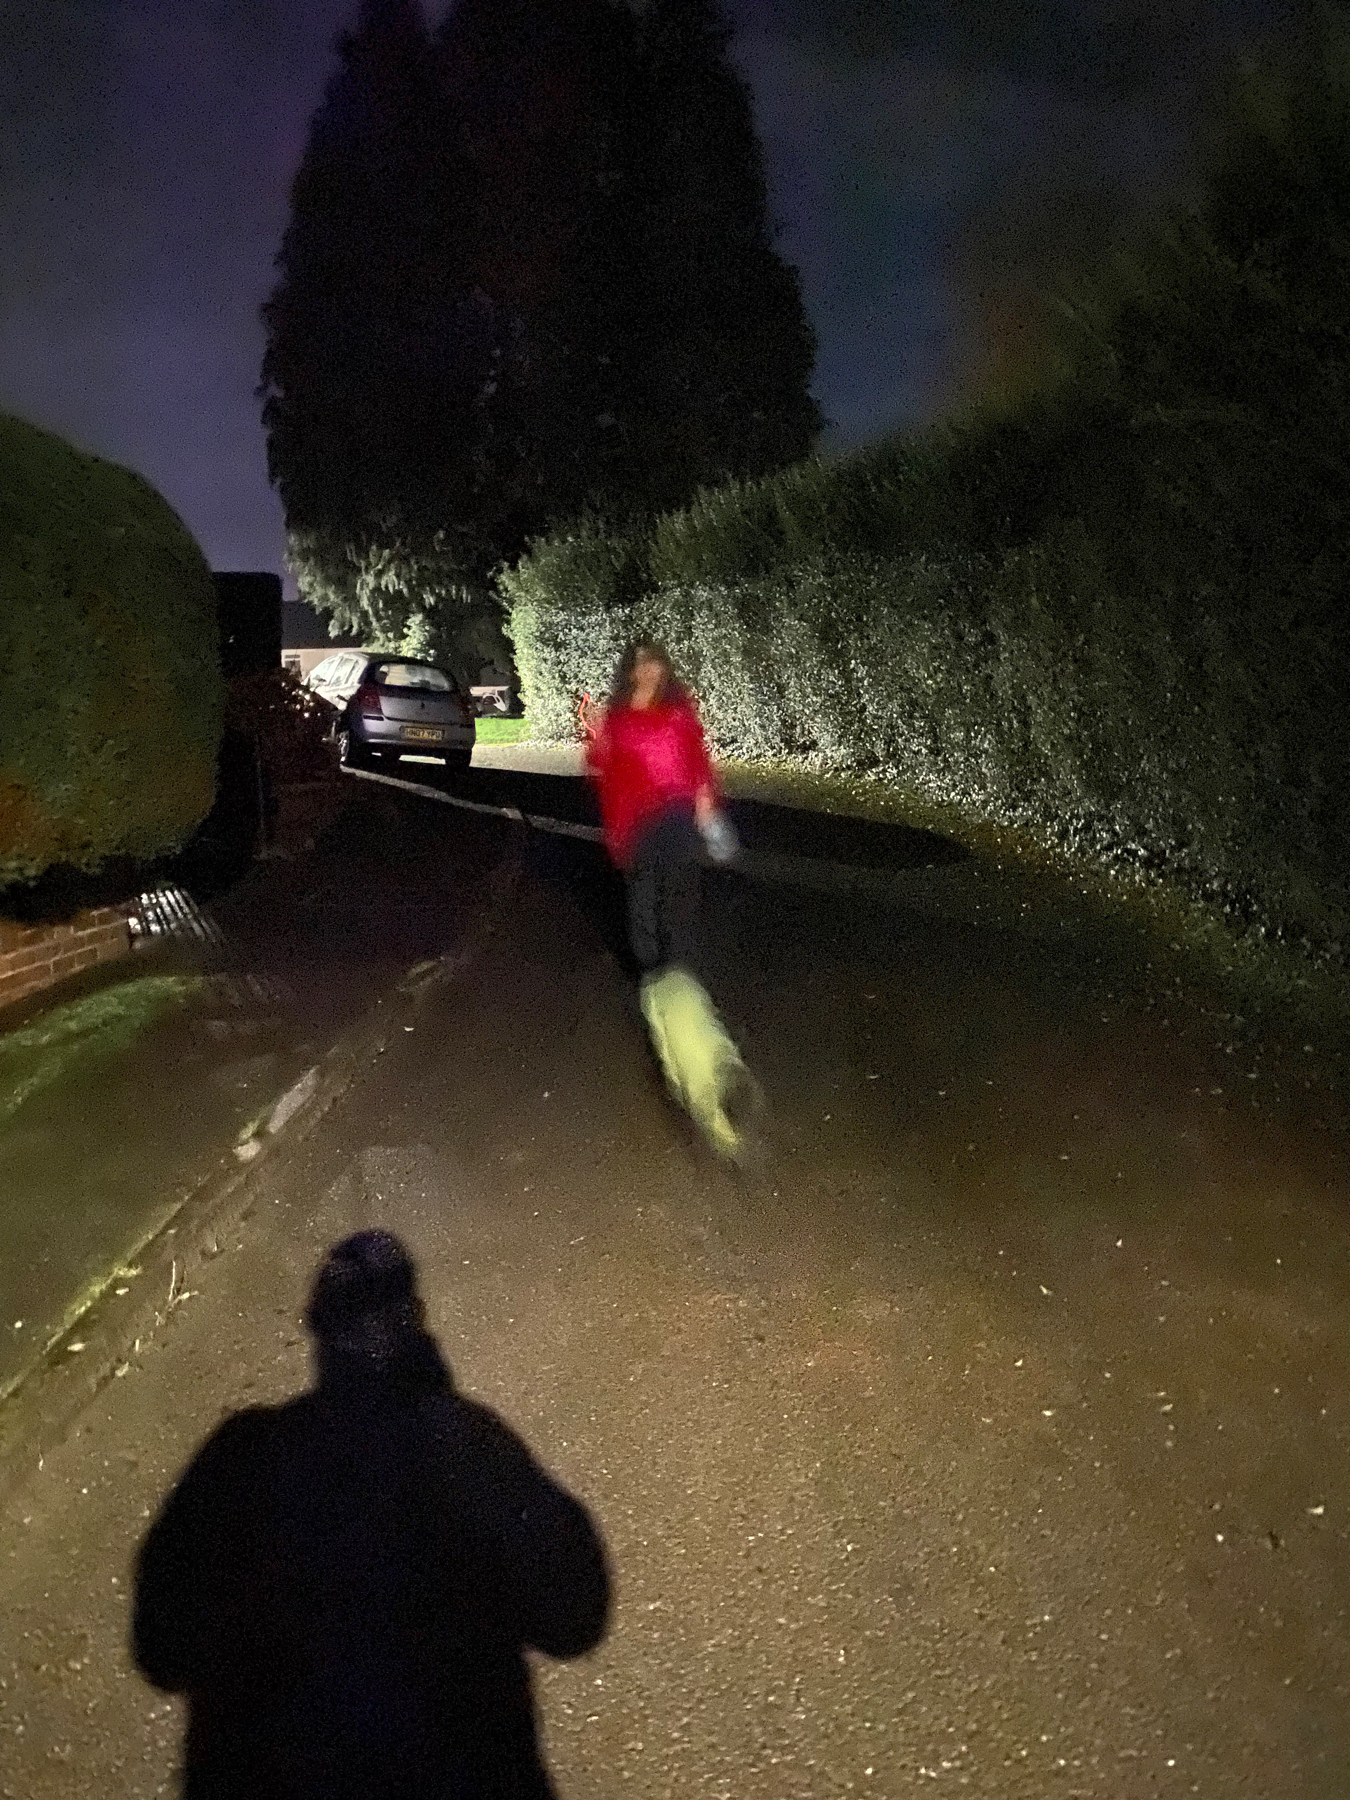 Blurry nighttime street view with woman walking a dog